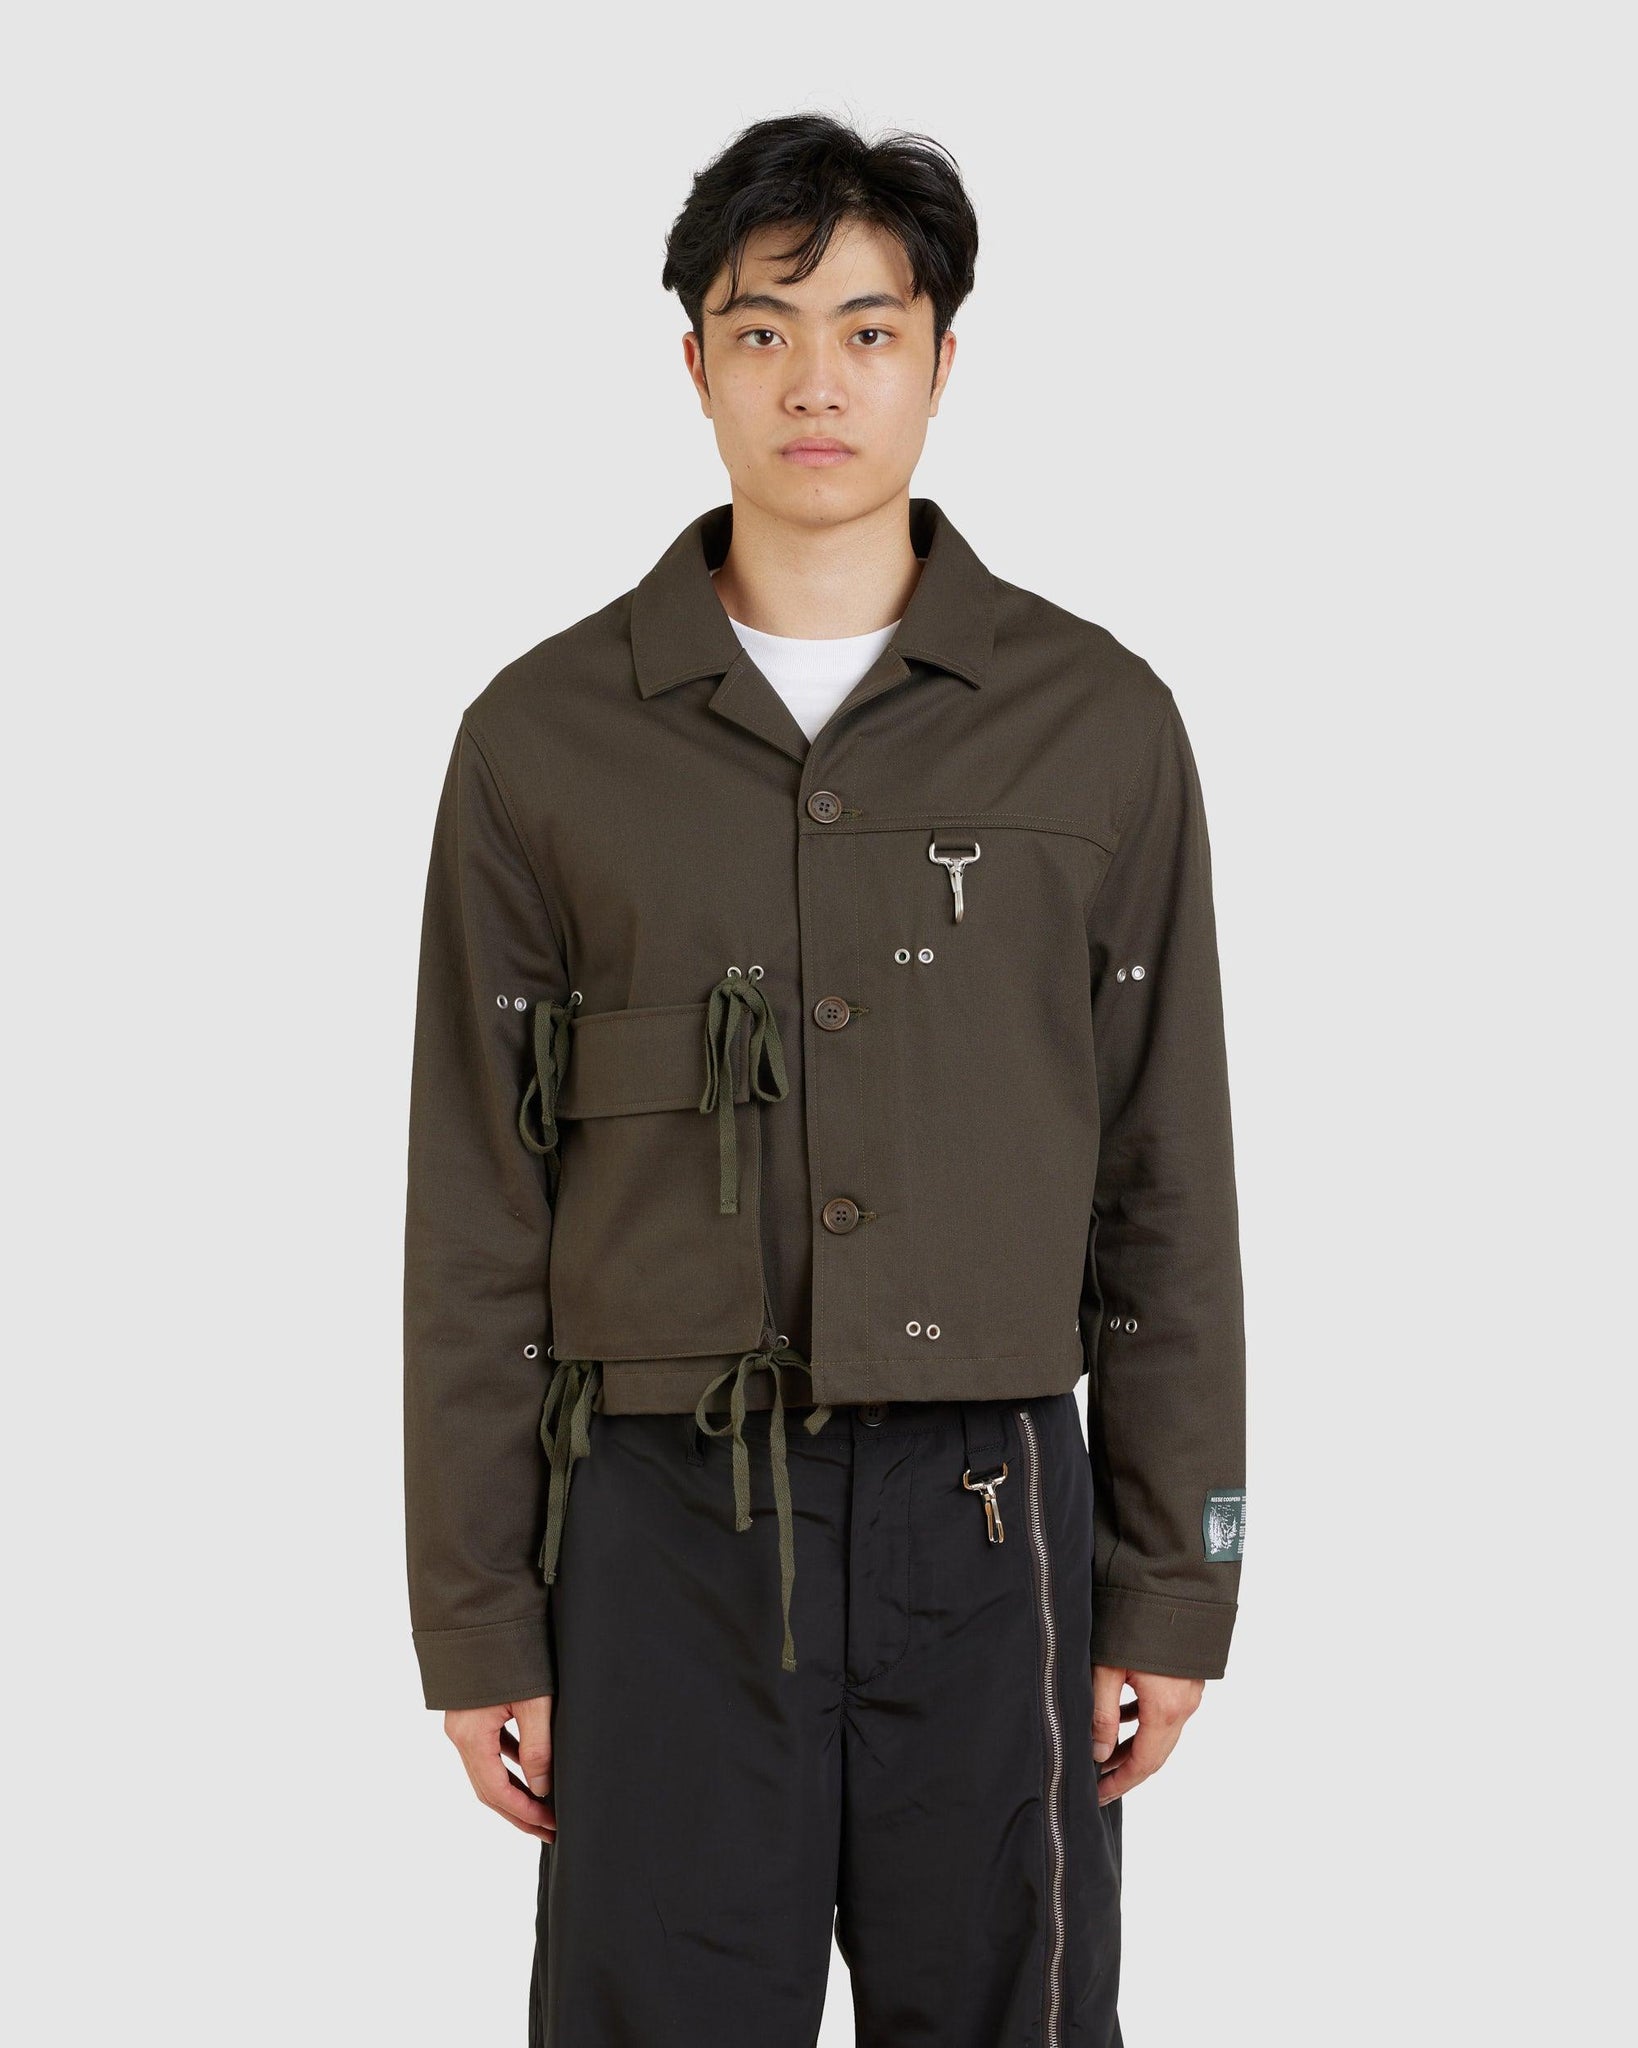 Modular Pocket Jacket - {{ collection.title }} - Chinatown Country Club 